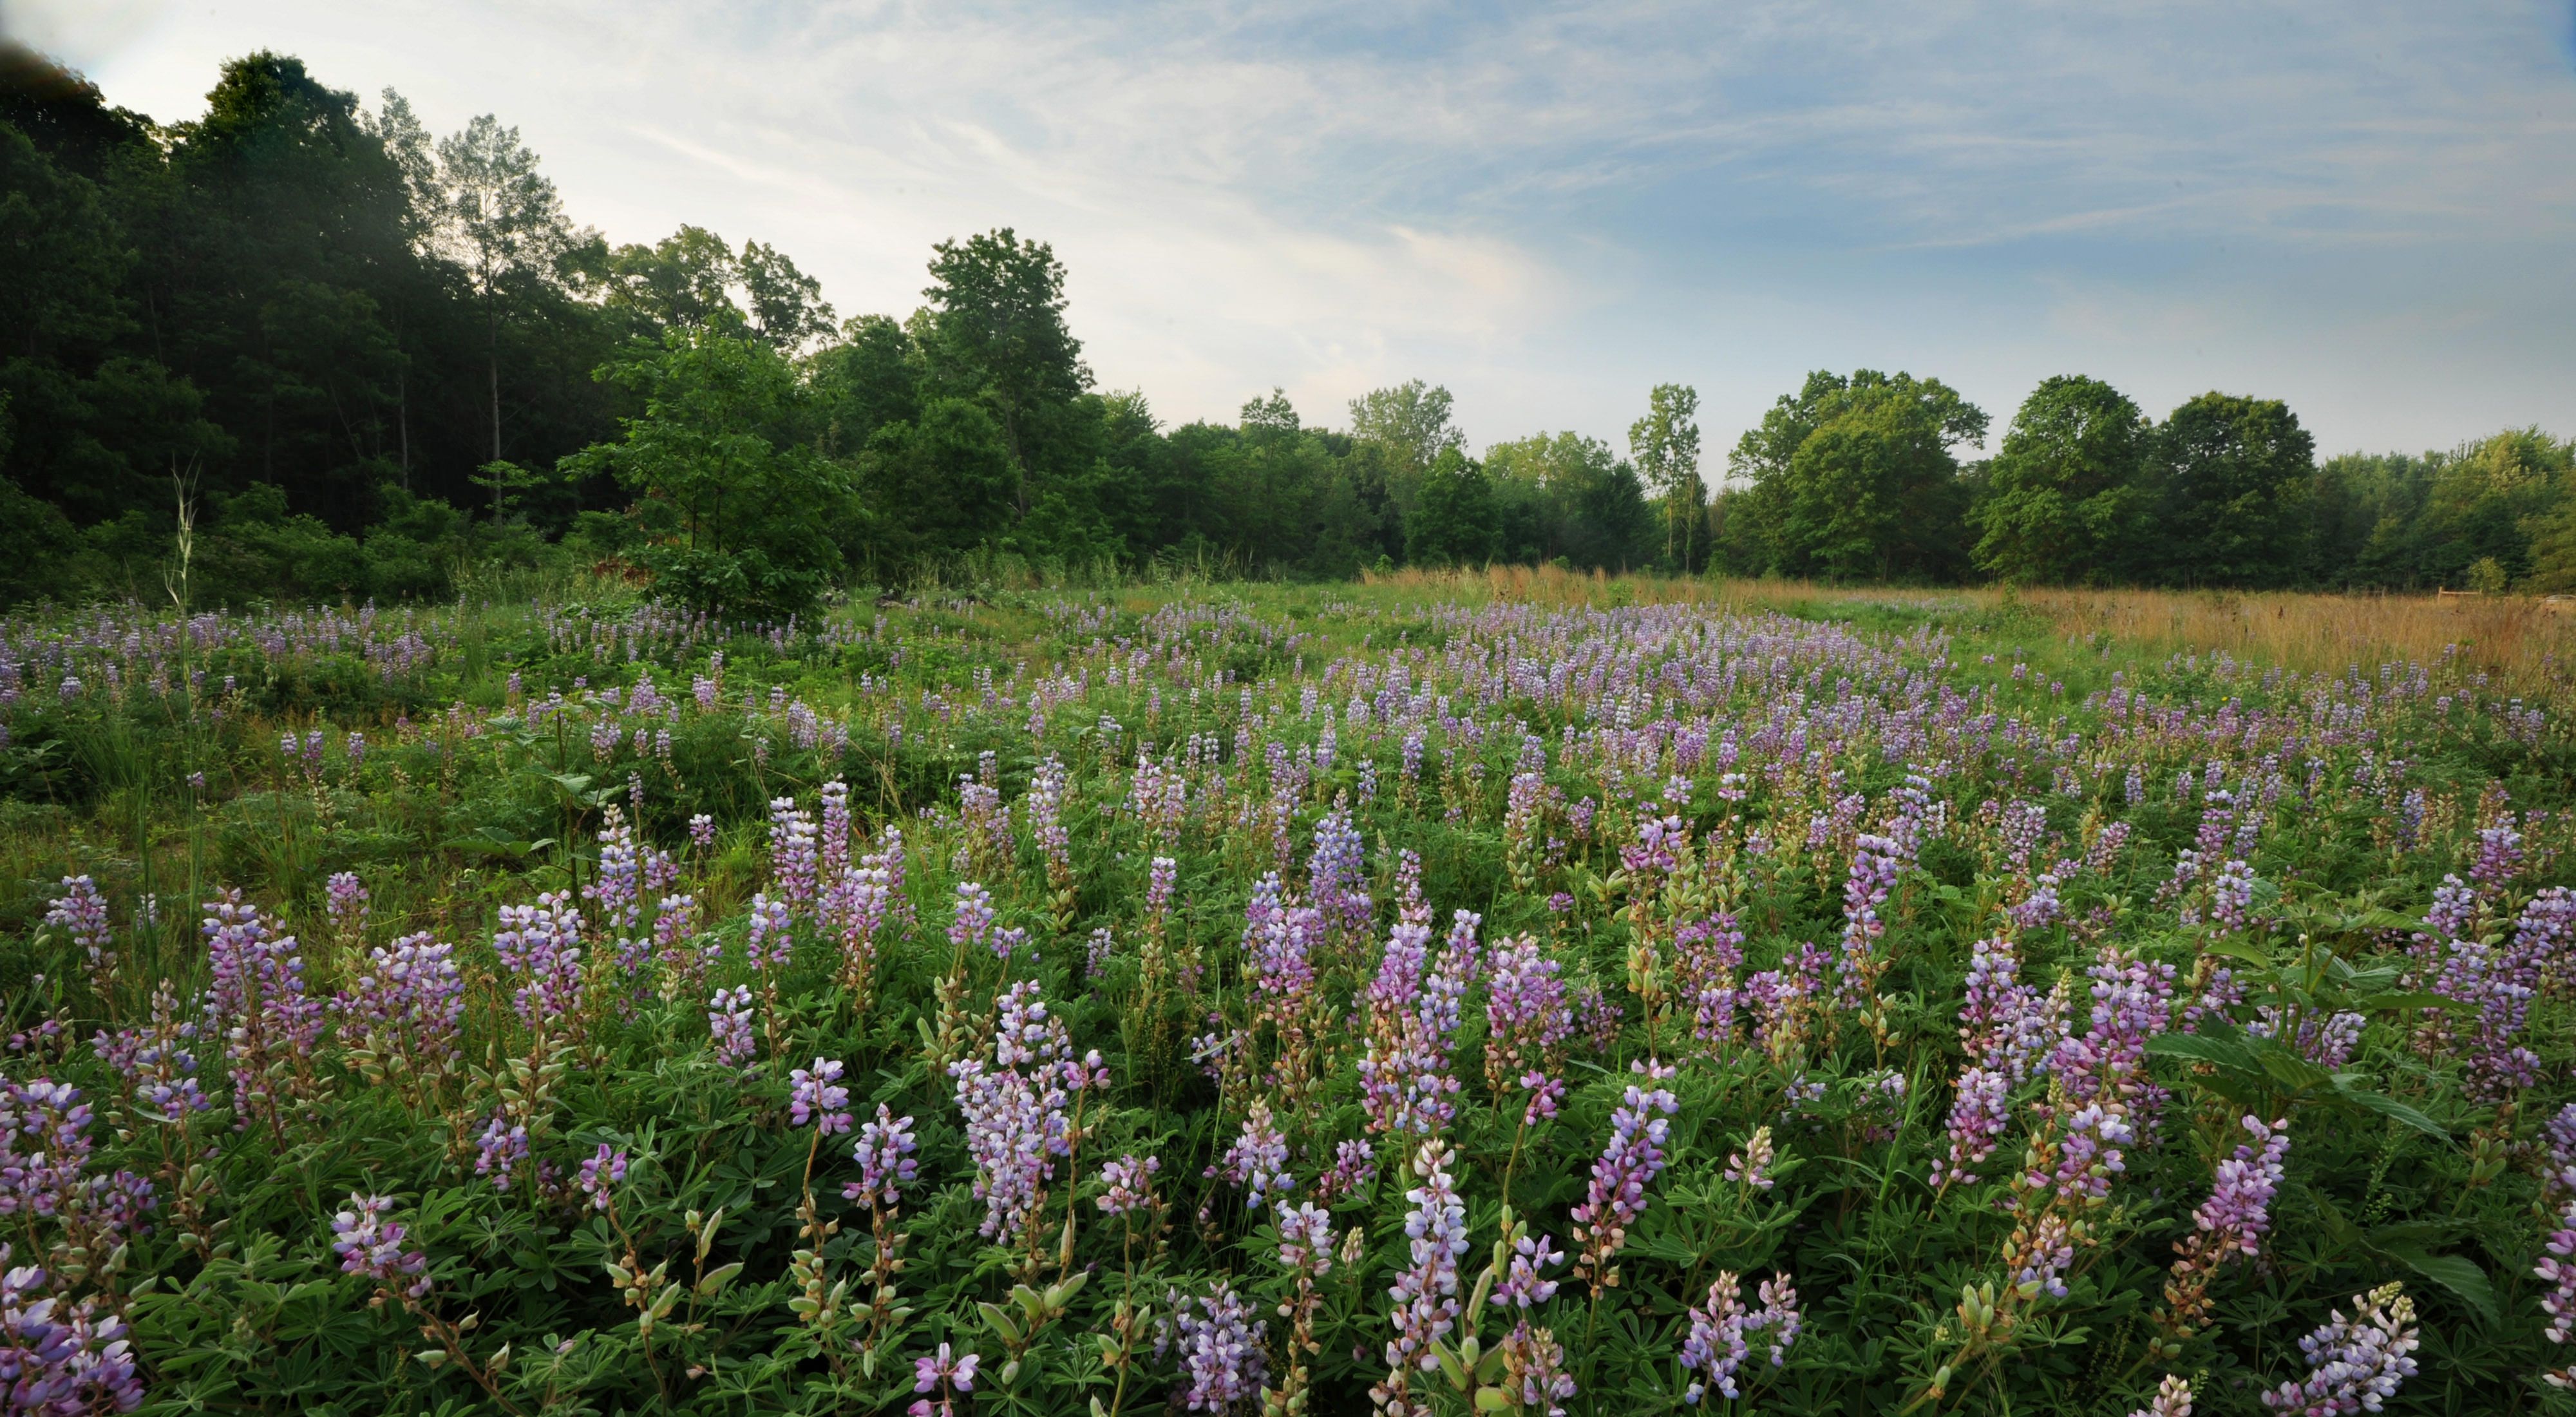 A field of purple lupine stretches to a border of trees in the background.